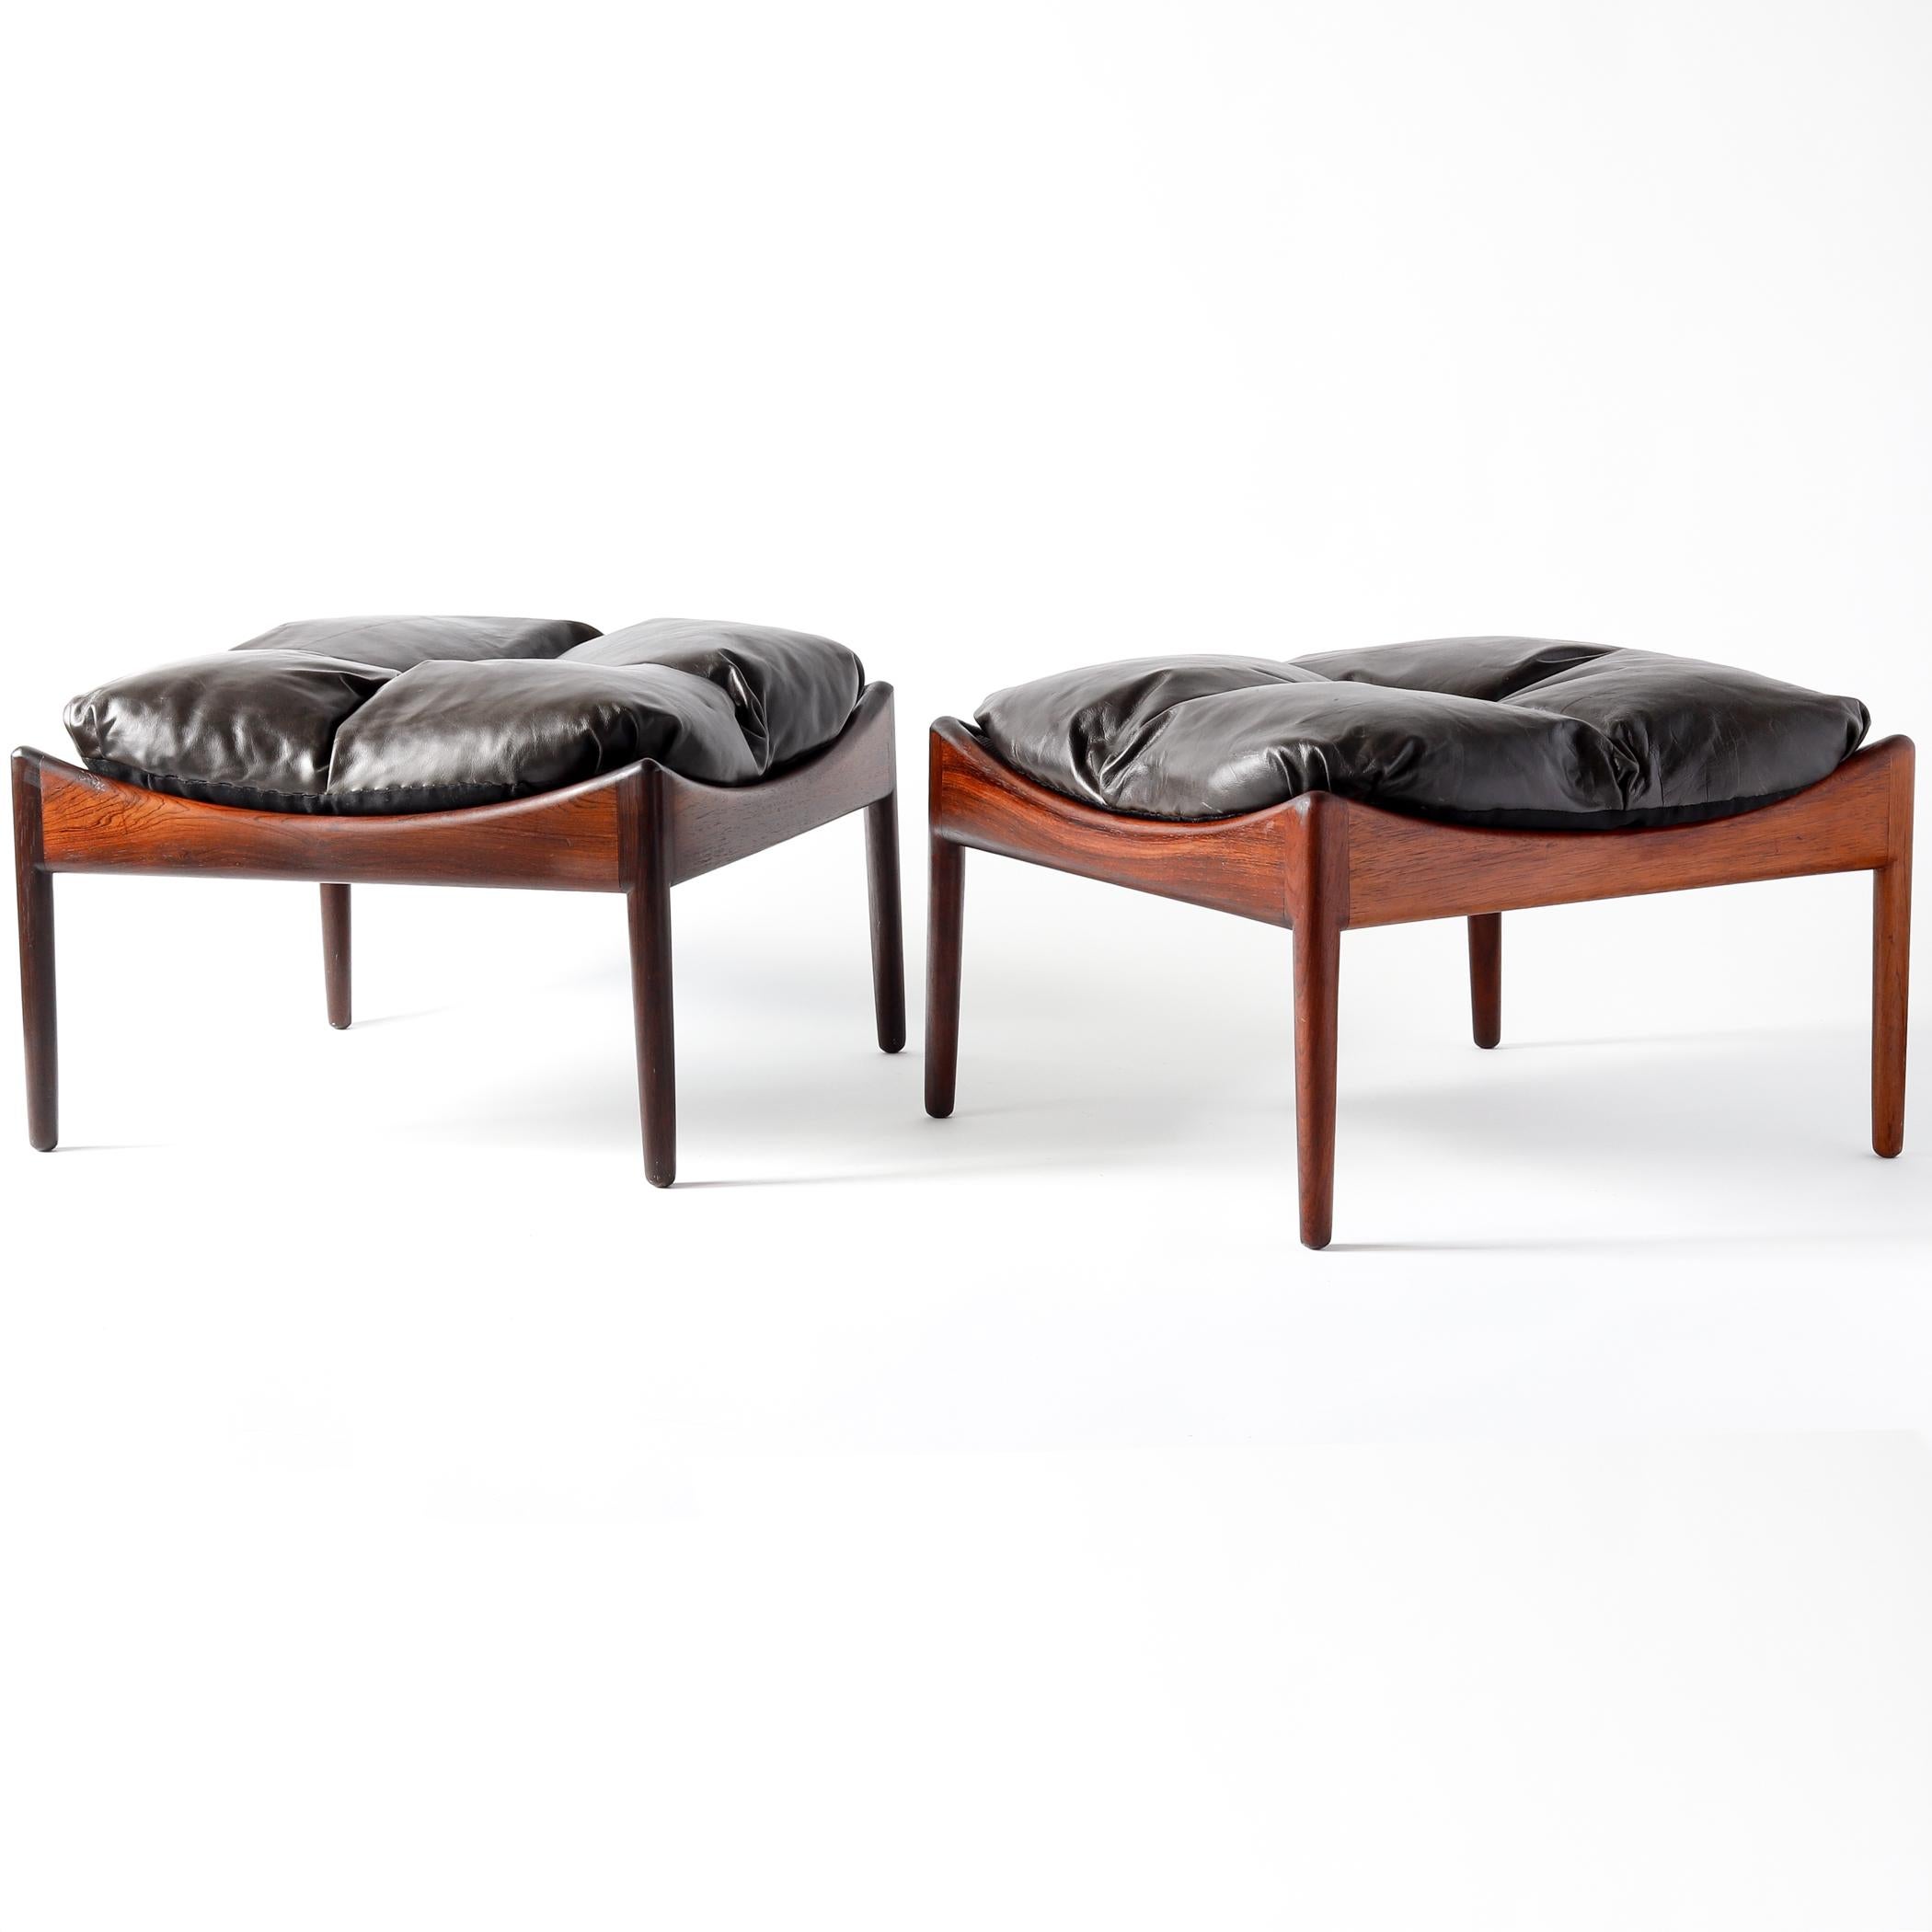 Pair of Kristian Vedel Rosewood Modus Ottomans with Brown Leather Upholstery  (Moderne der Mitte des Jahrhunderts) im Angebot